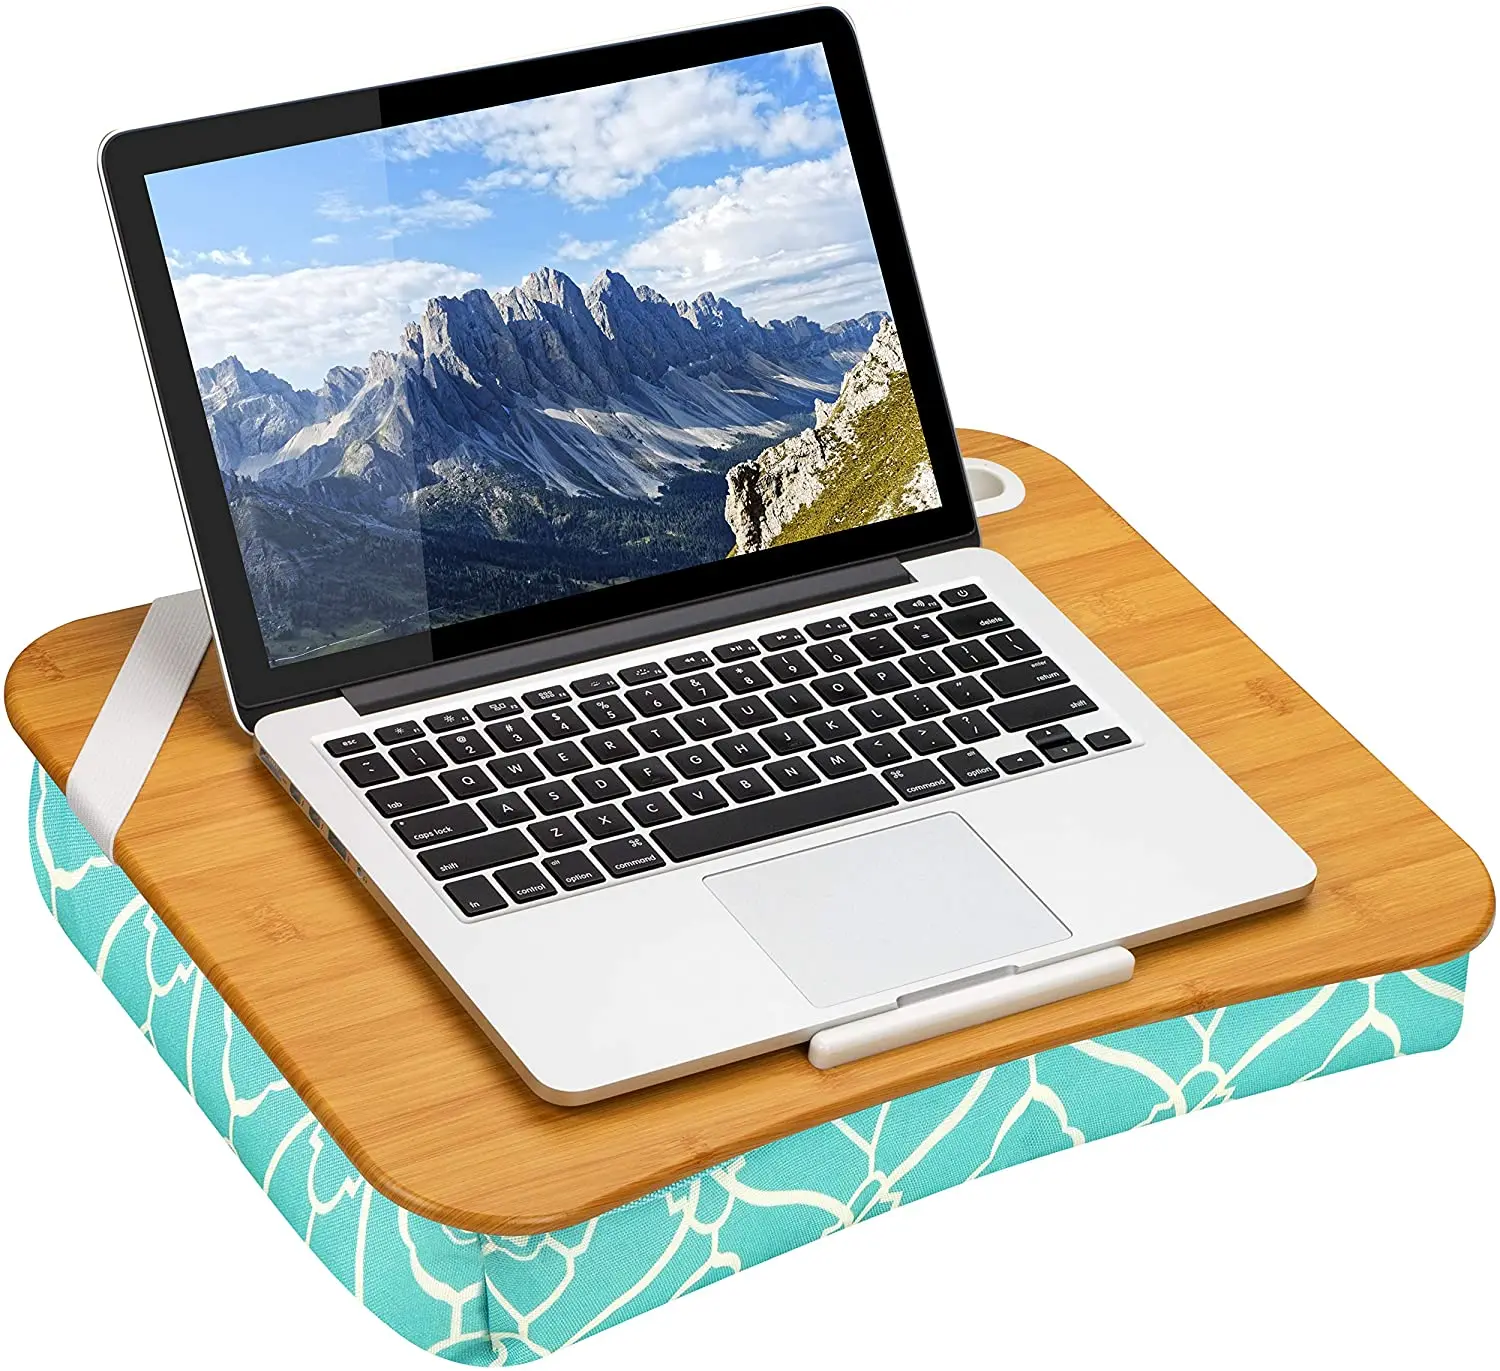 Hilier Bamboo Lapdesk Laptop Stand with Detachable Cushion Pillow Pad 